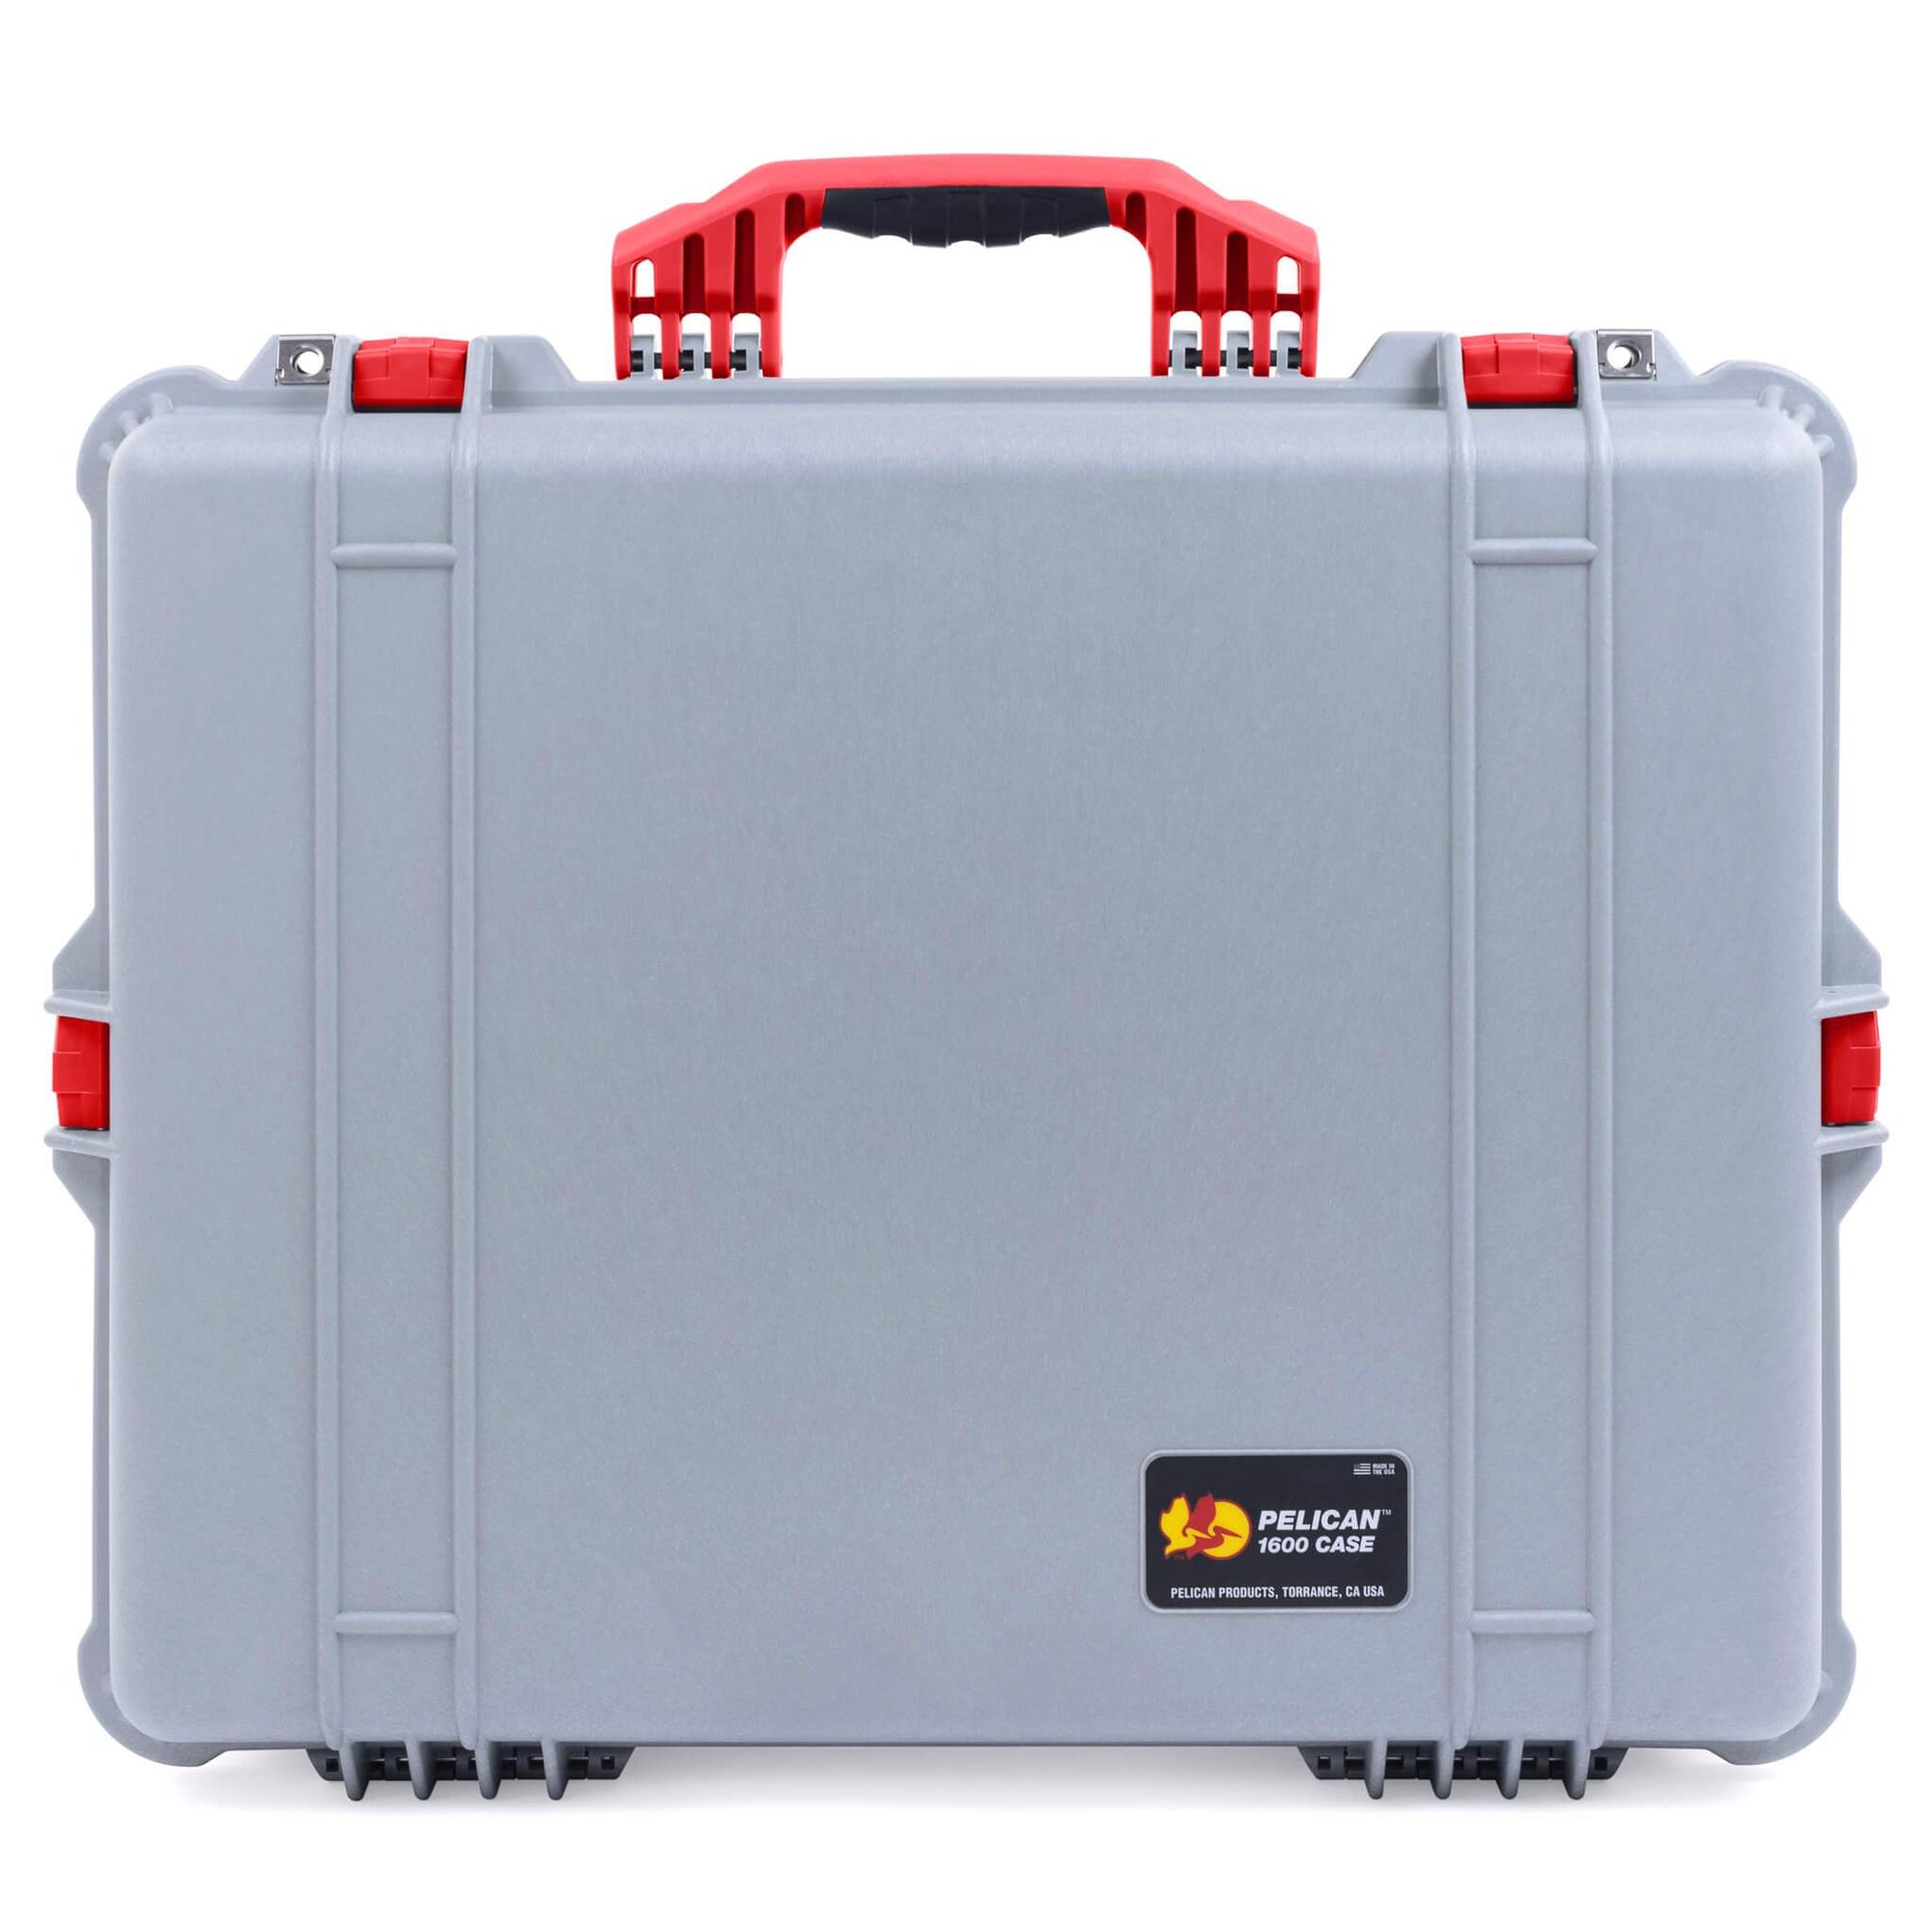 Pelican 1600 Case, Silver with Red Handle & Latches ColorCase 